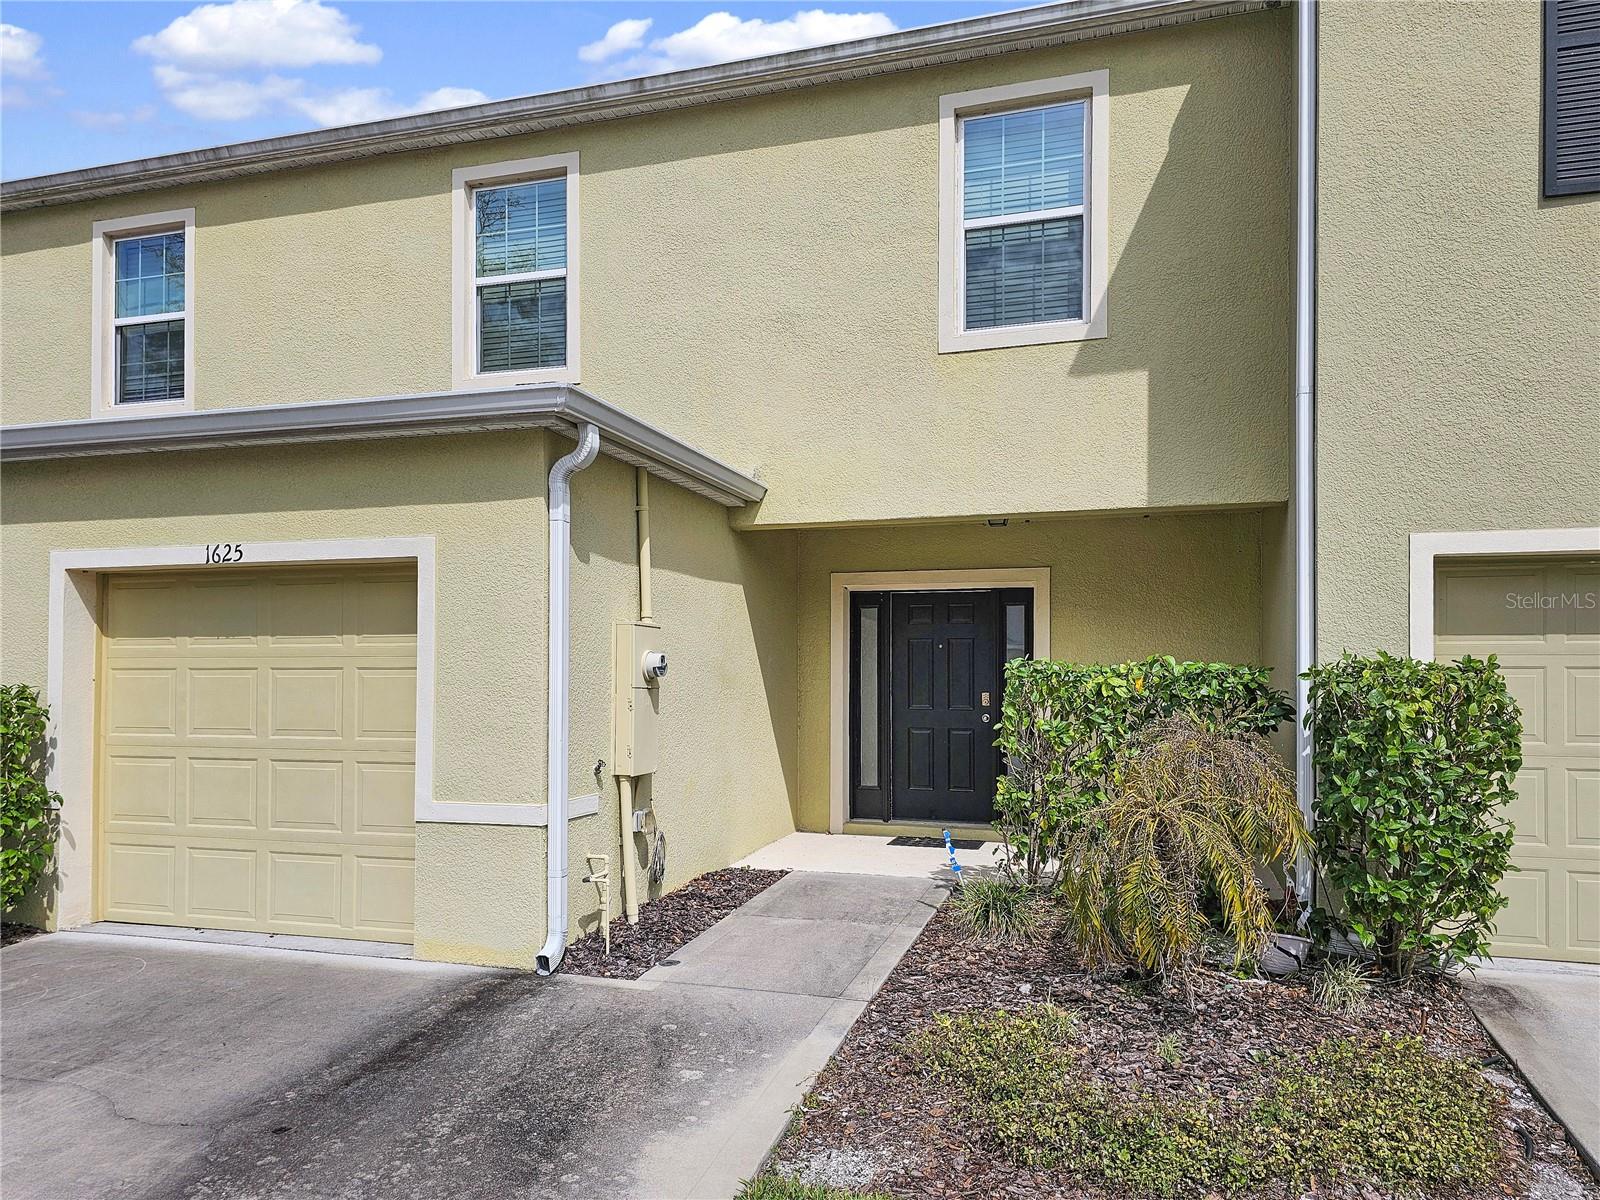 View HOLLY HILL, FL 32117 townhome